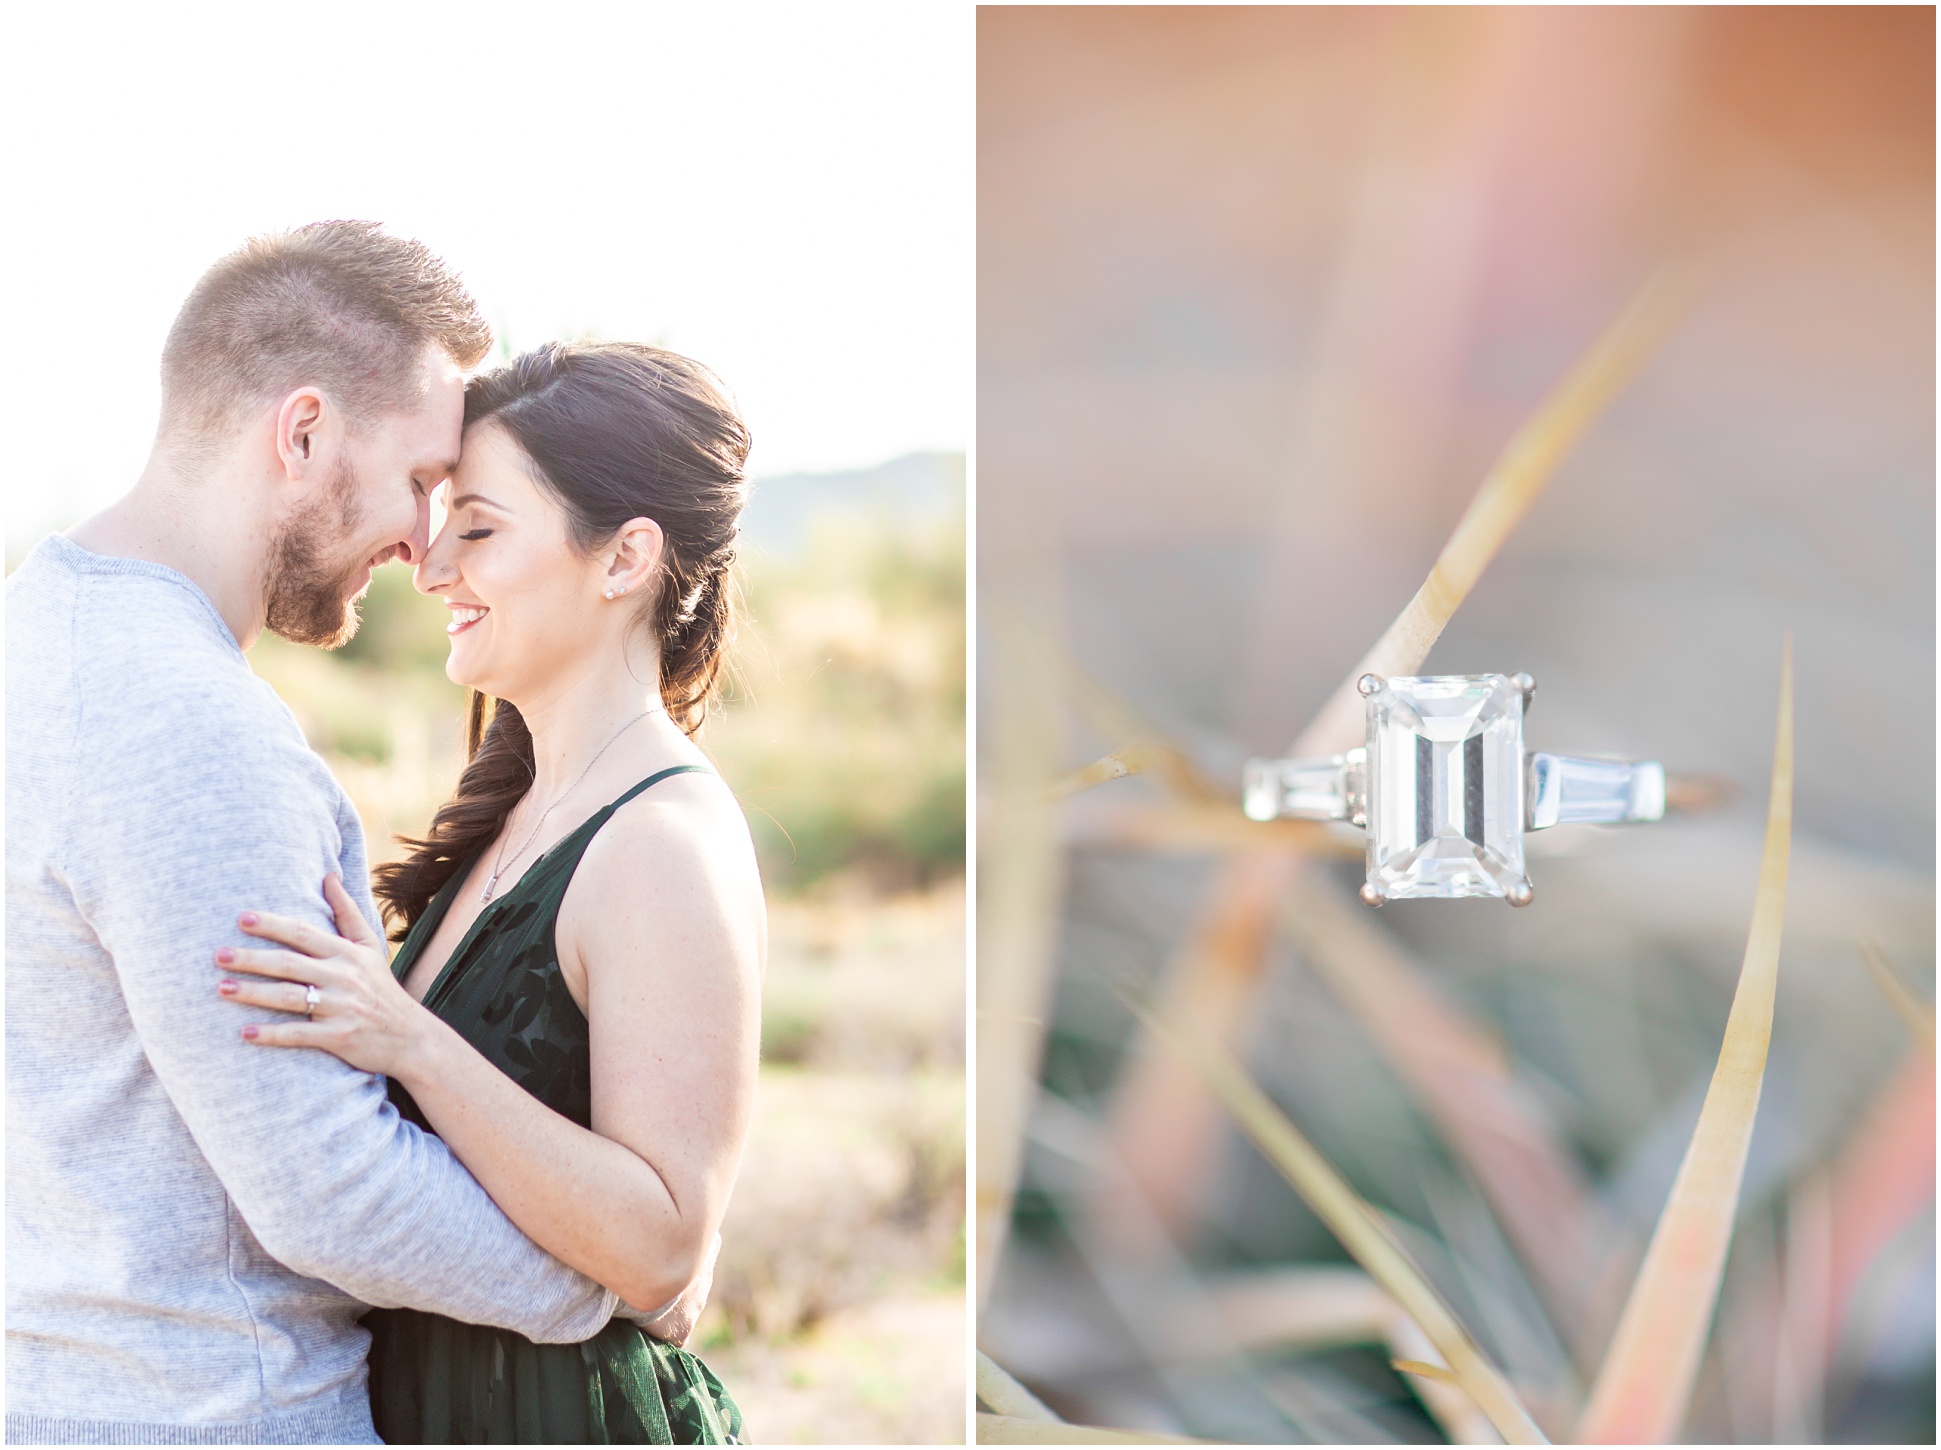 Left Image: Jake and Kaila nose to nose, right image: square diamond on fish hook cactus